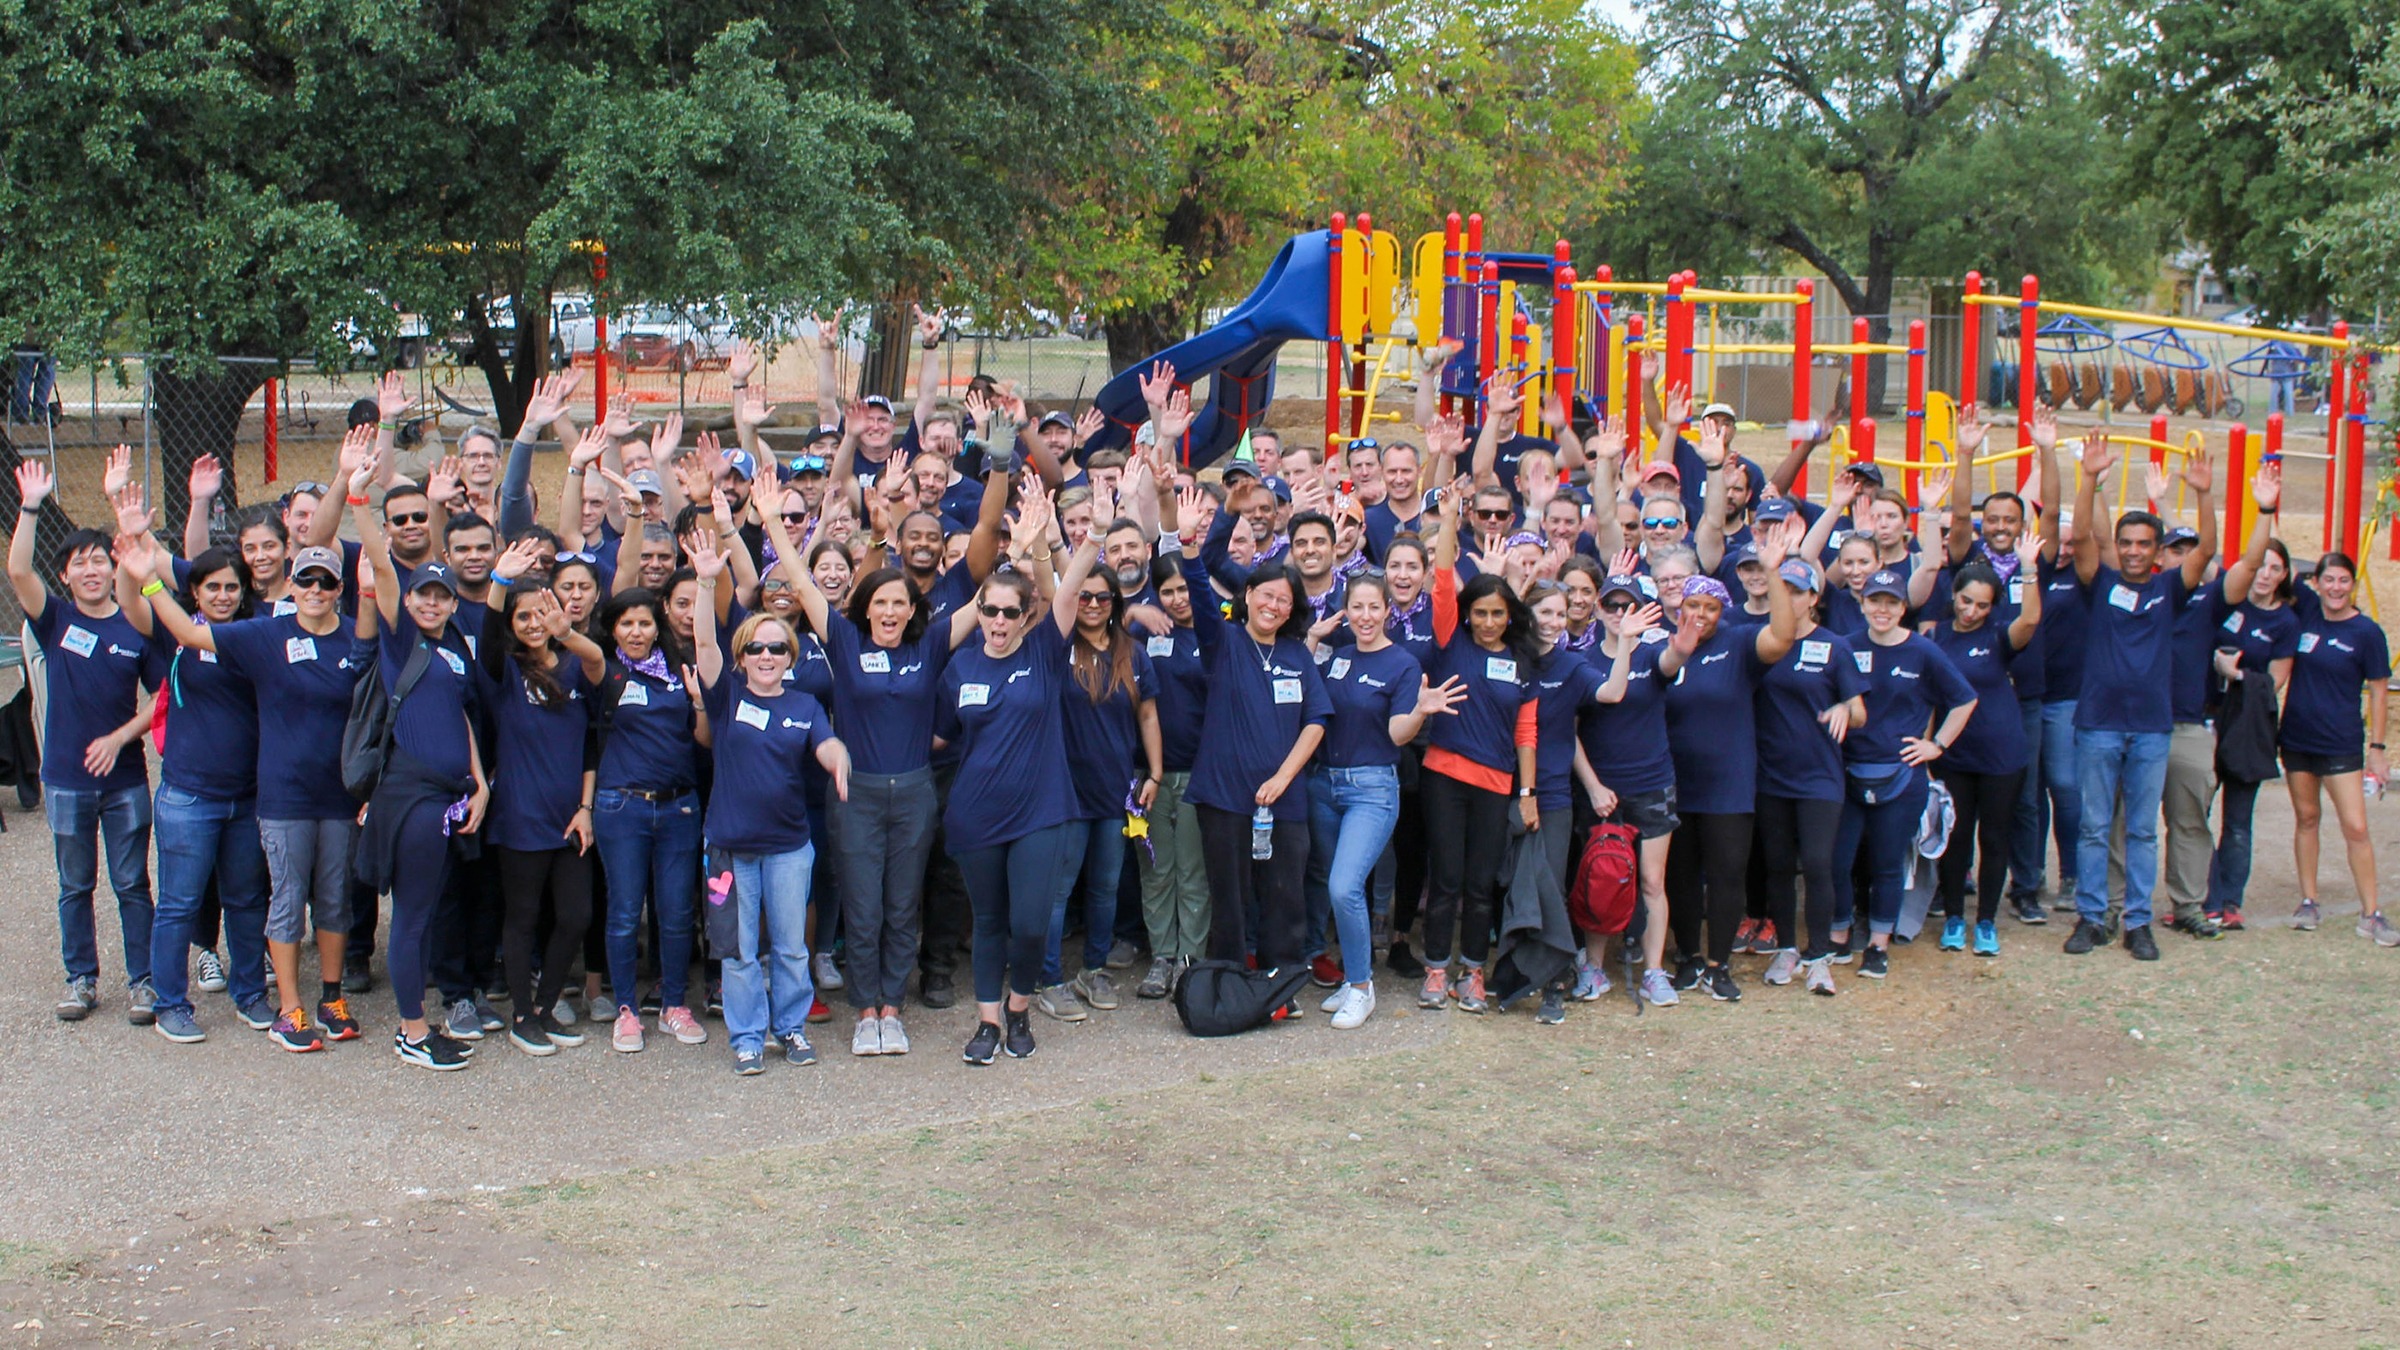 The Dell Foundation team celebrate the completion of a volunteer event.